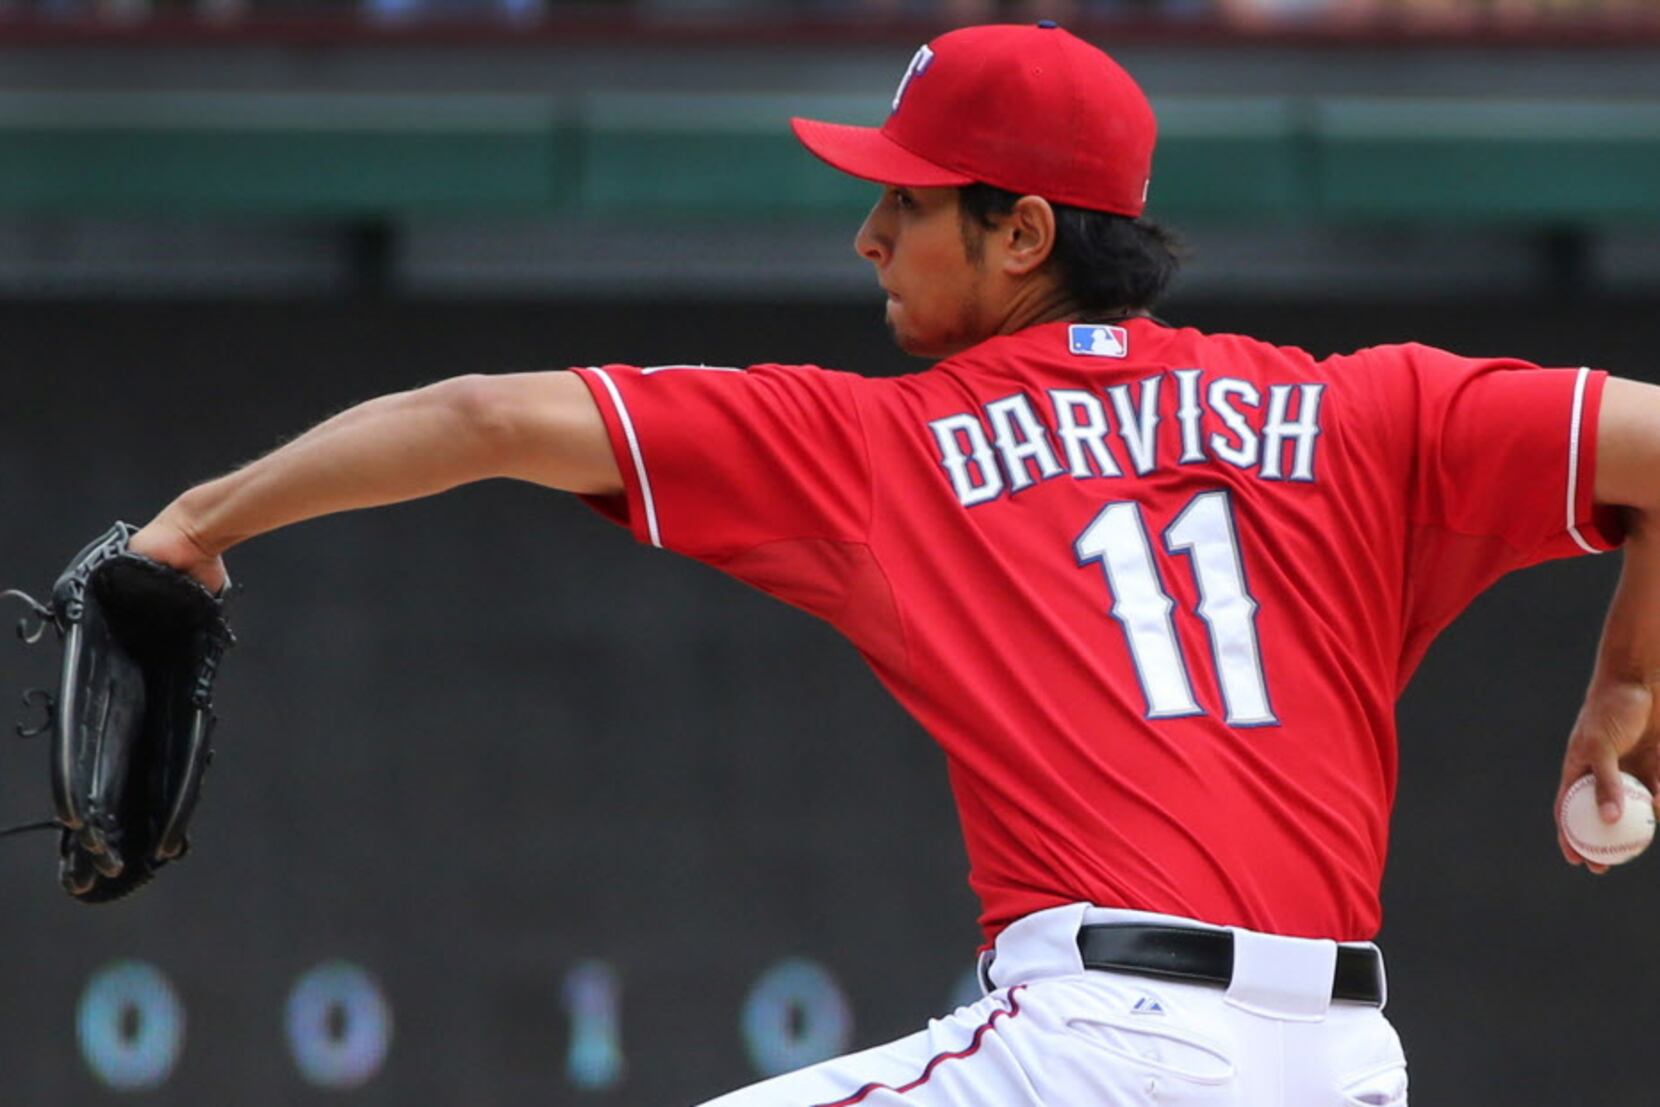 Yu Darvish finished second in Cy Young Award voting, but one